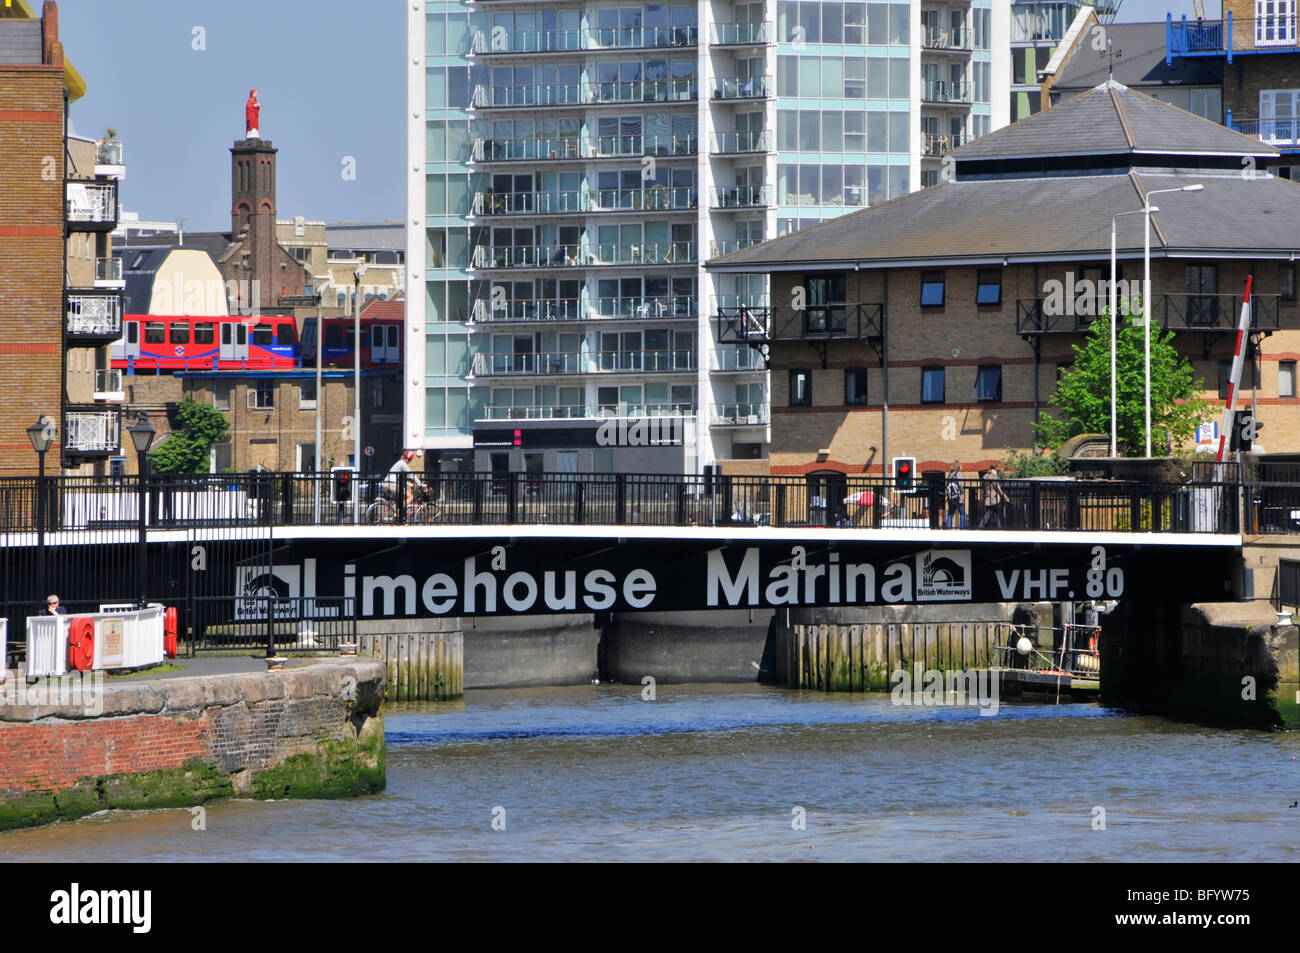 Road swing bridge giving access from River Thames to locks, Limehouse Marina & canals Stock Photo